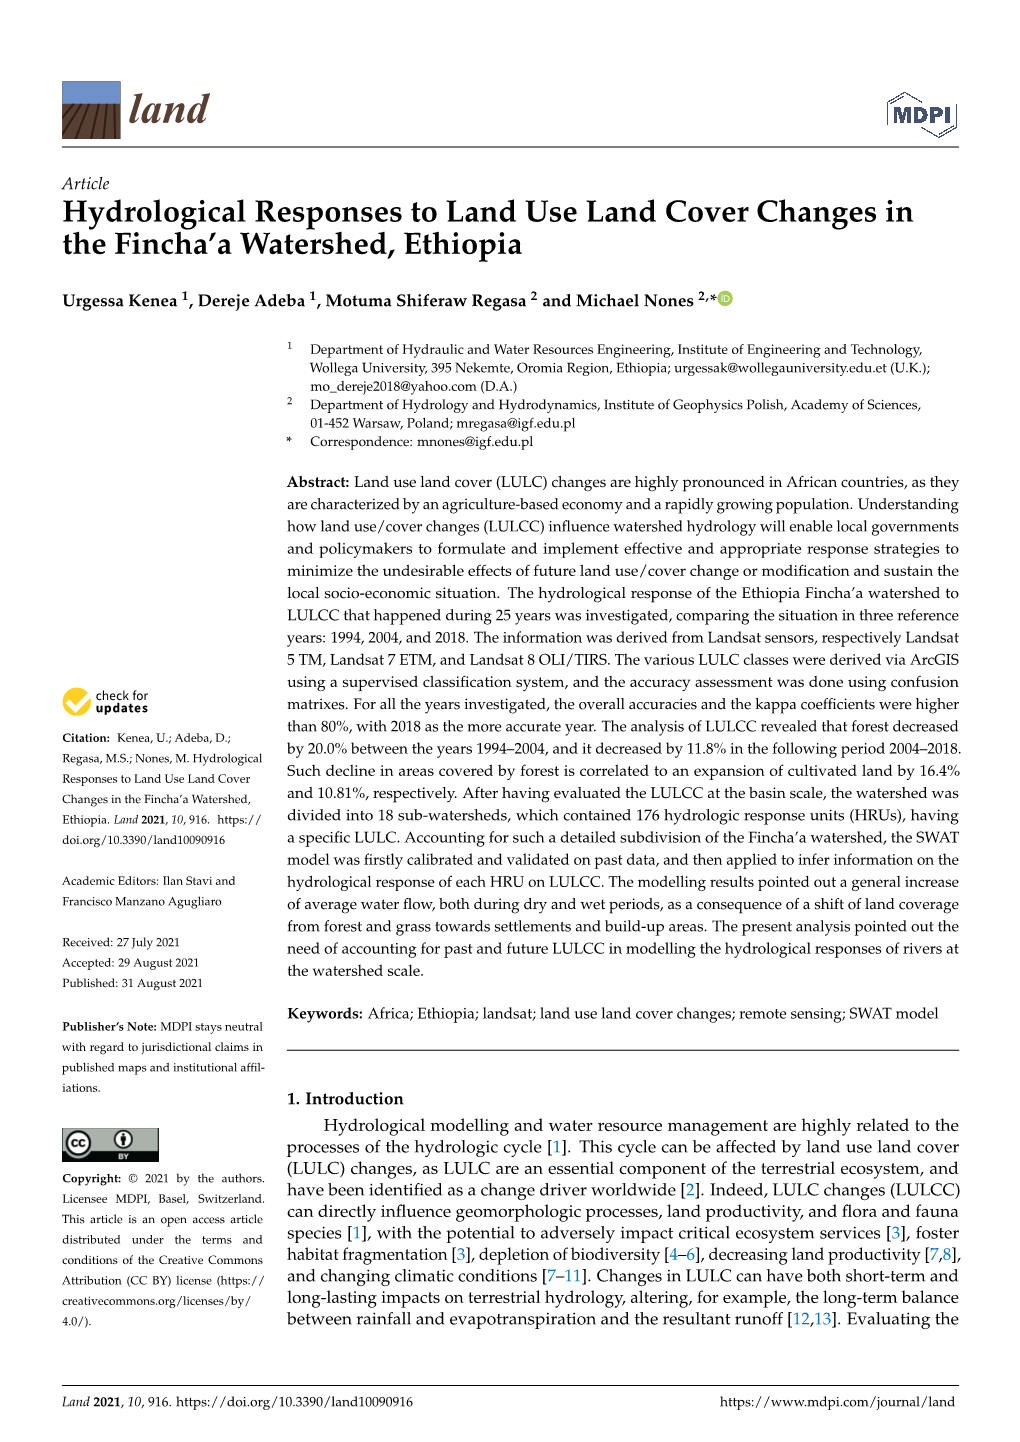 Hydrological Responses to Land Use Land Cover Changes in the Fincha’A Watershed, Ethiopia